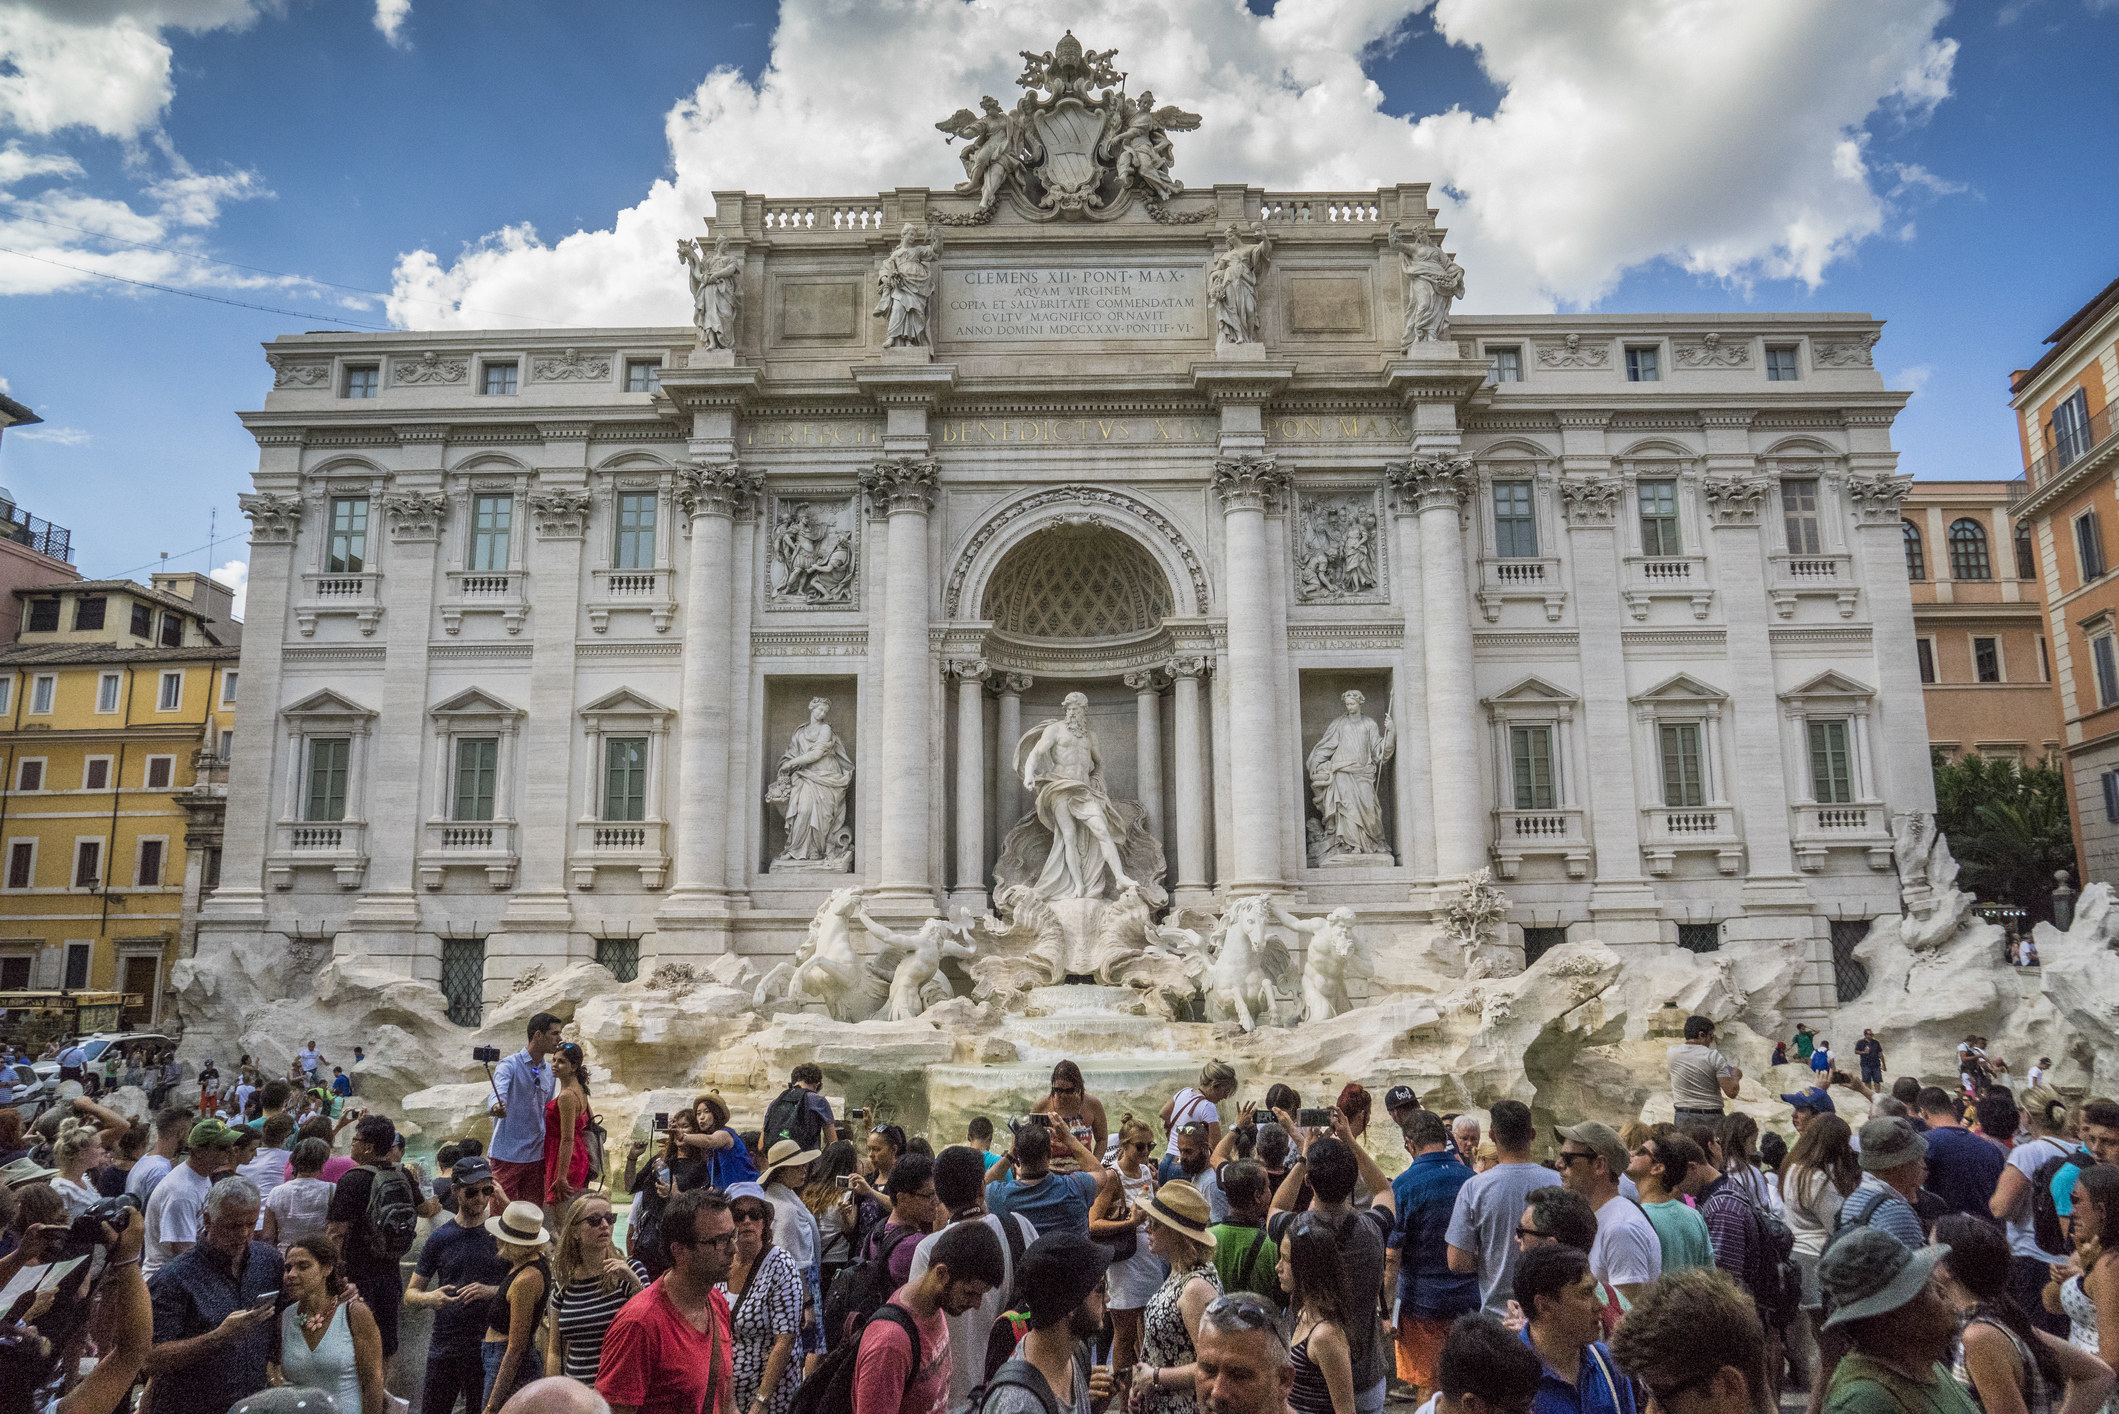 A busy plaza by the Trevi Fountain in Rome.